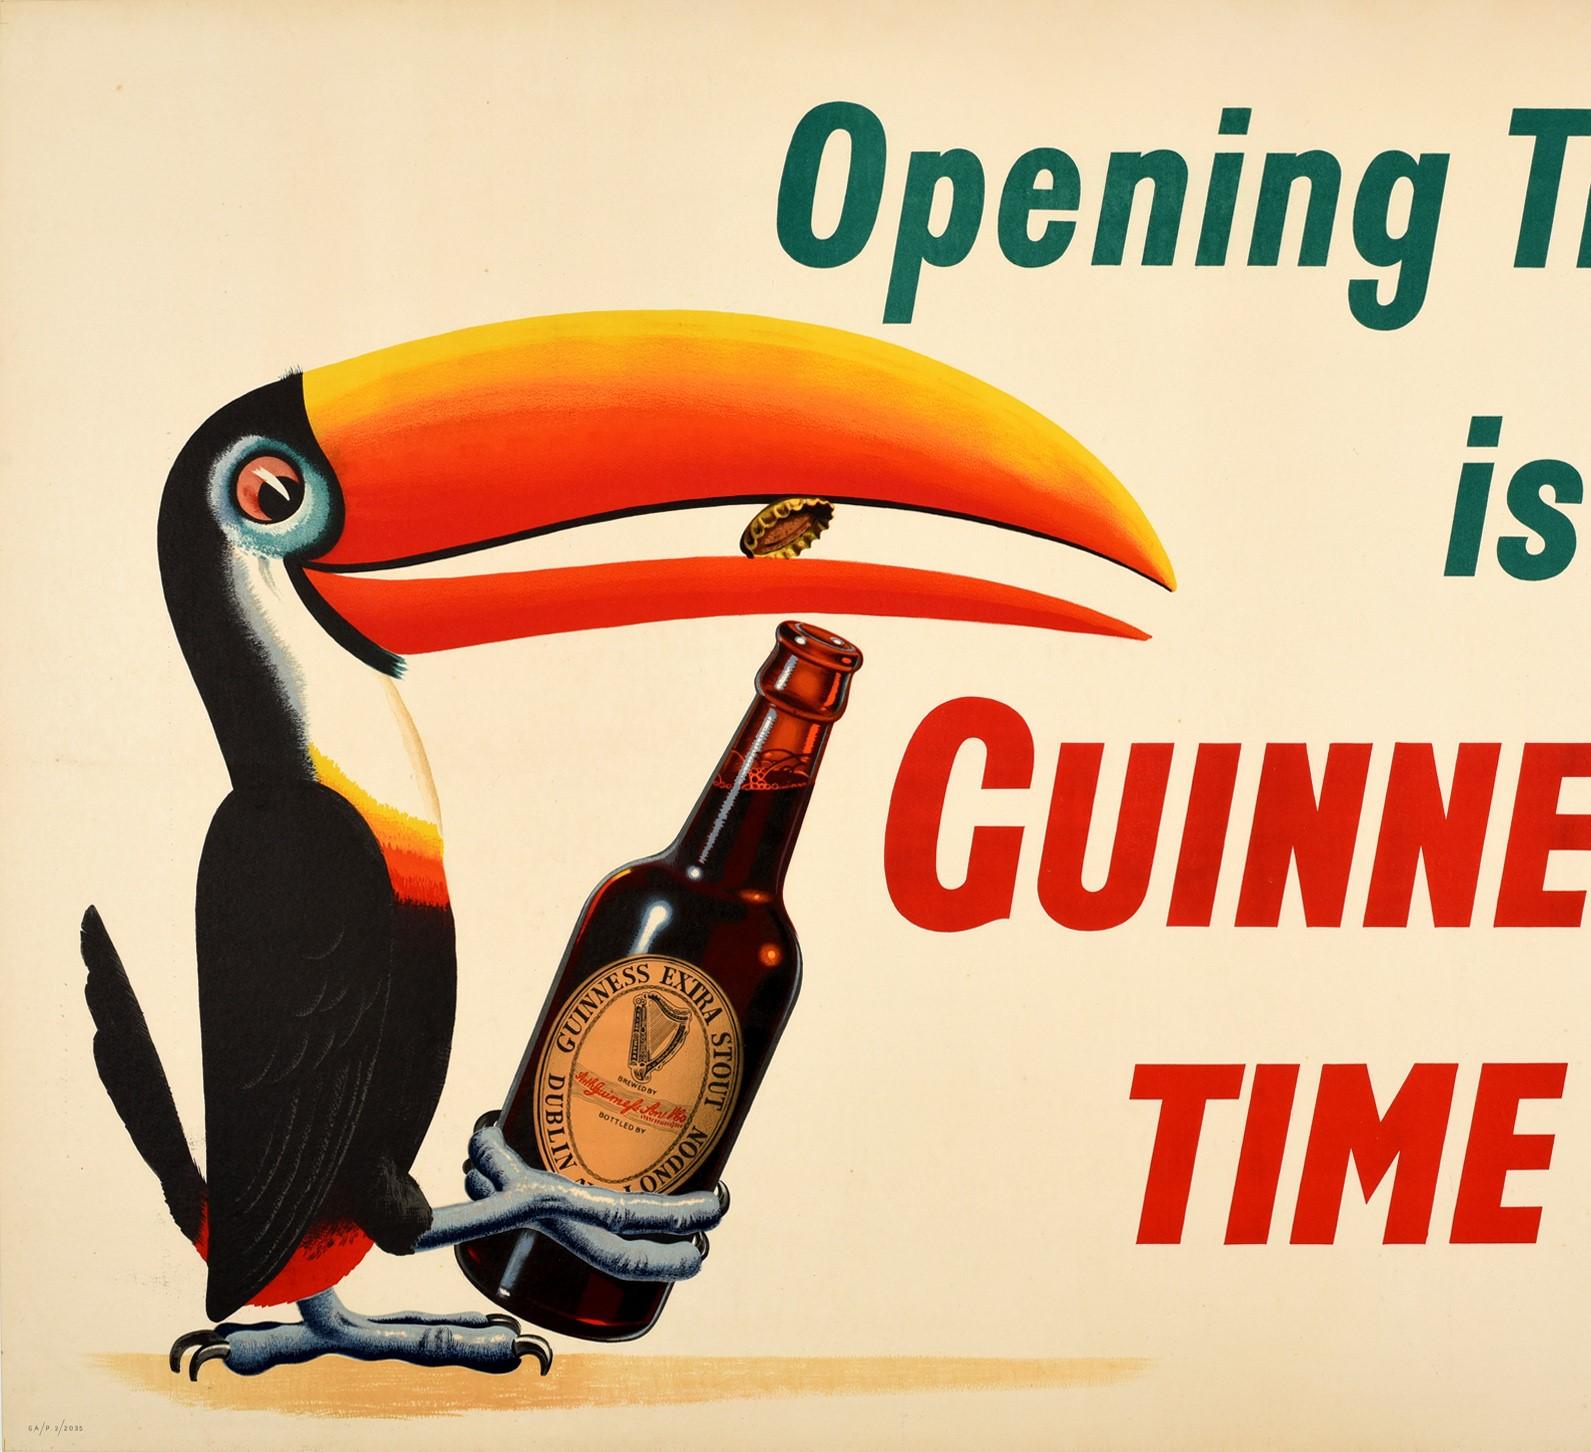 Original vintage Guinness advertising poster - Opening Time is Guinness Time - featuring an iconic design depicting the trademark smiling toucan using his colourful bill to open a bottle of Guinness extra stout, the title in bold green and red